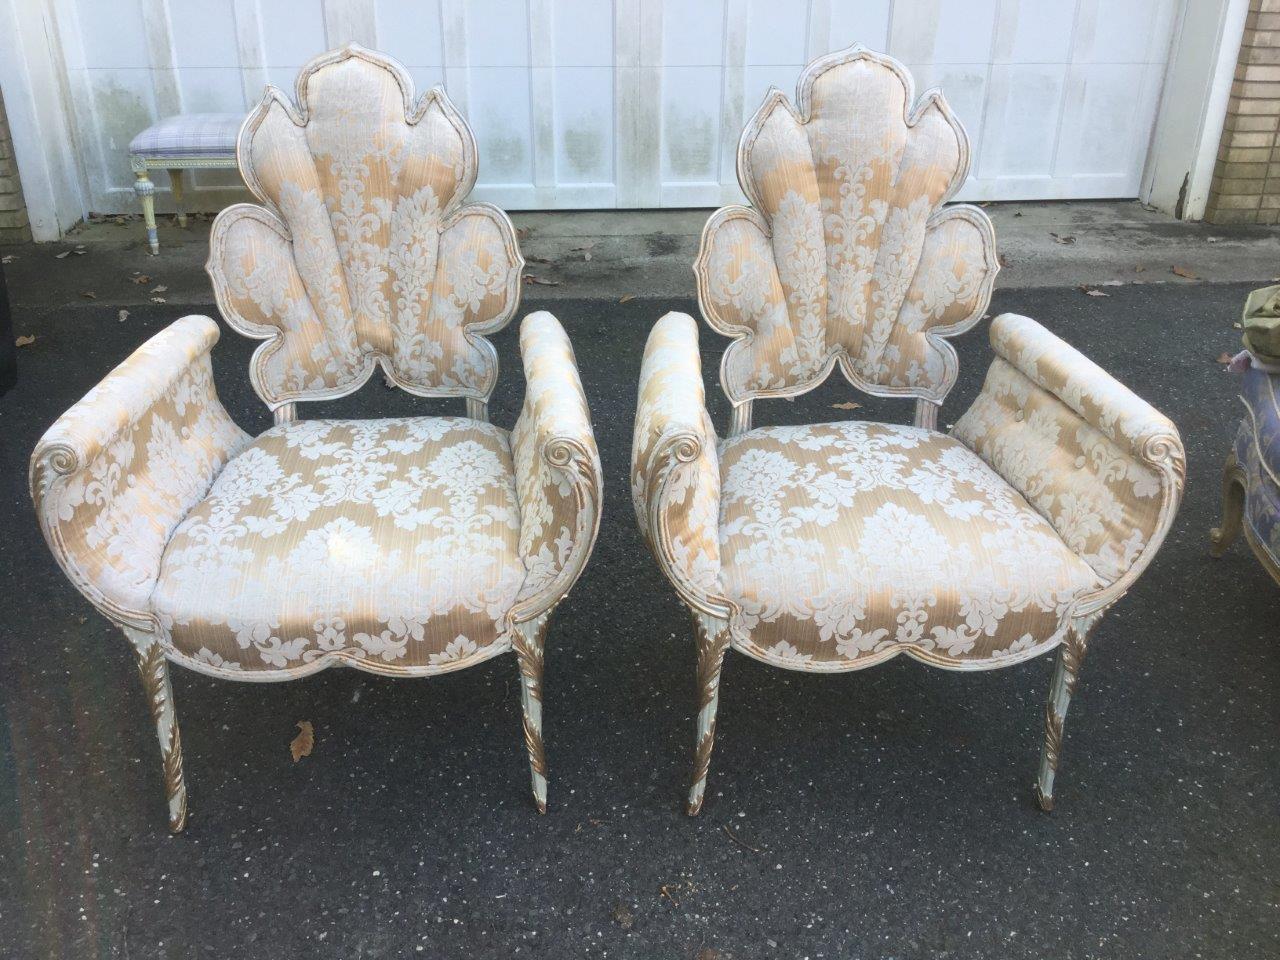 Fabulously theatrical pair of Oscar de la Renta tulip chairs having wide rolled arms and a tulip shaped back painted in a very pale shade of green with a champagne color overlay. The upholstery is a vintage silk damask and the back is a coordinating